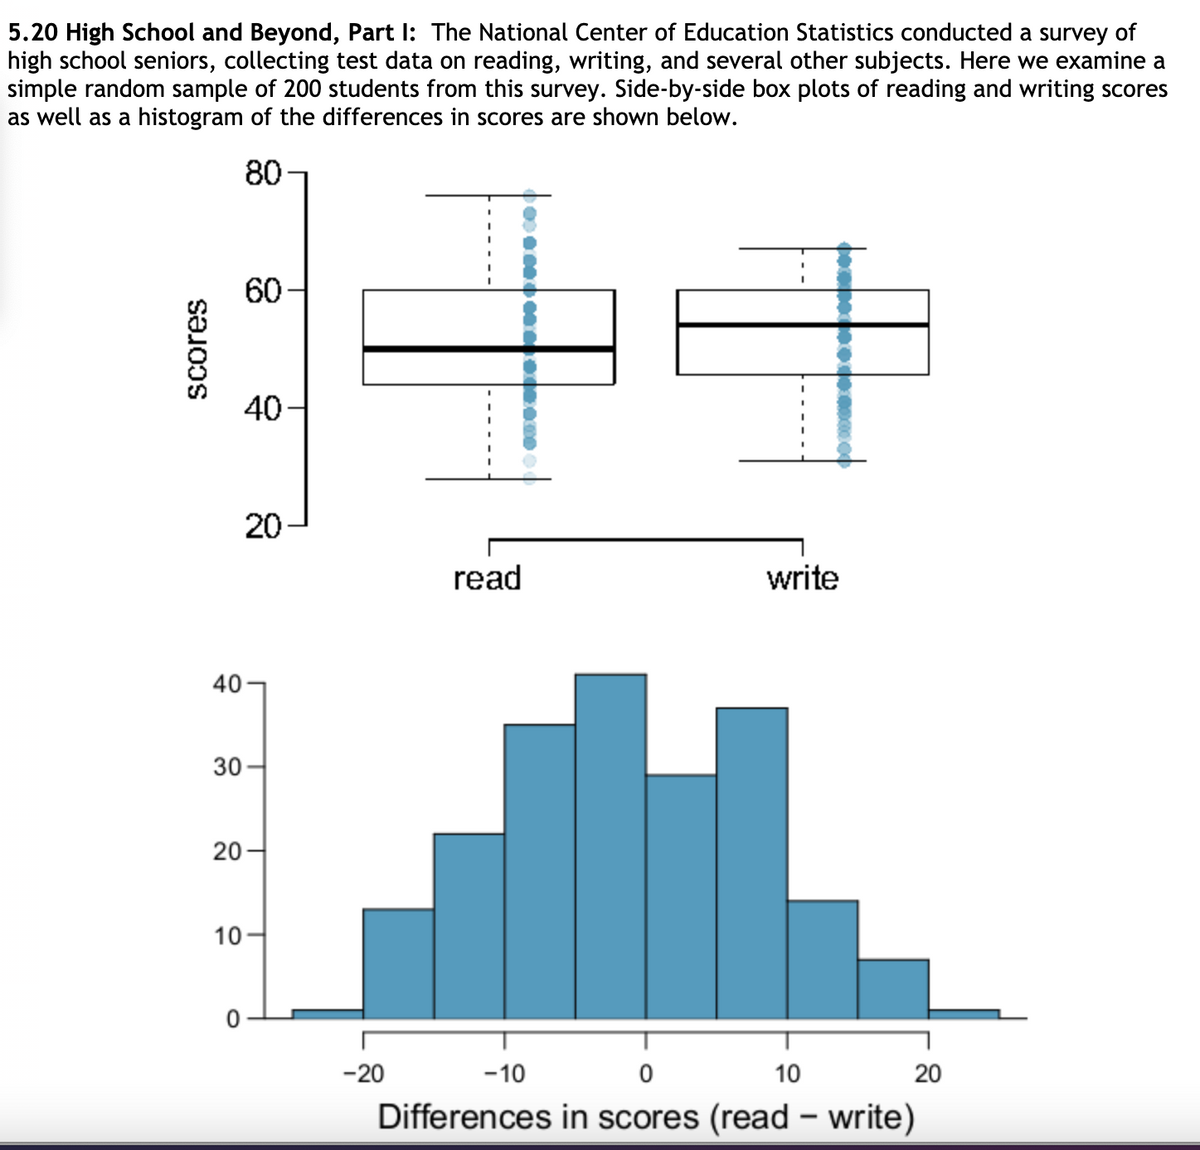 5.20 High School and Beyond, Part I: The National Center of Education Statistics conducted a survey of
high school seniors, collecting test data on reading, writing, and several other subjects. Here we examine a
simple random sample of 200 students from this survey. Side-by-side box plots of reading and writing scores
as well as a histogram of the differences in scores are shown below.
80
60-
40
20
read
write
40 –
30
20-
10
-20
-10
10
20
Differences in scores (read– write)
Scores
